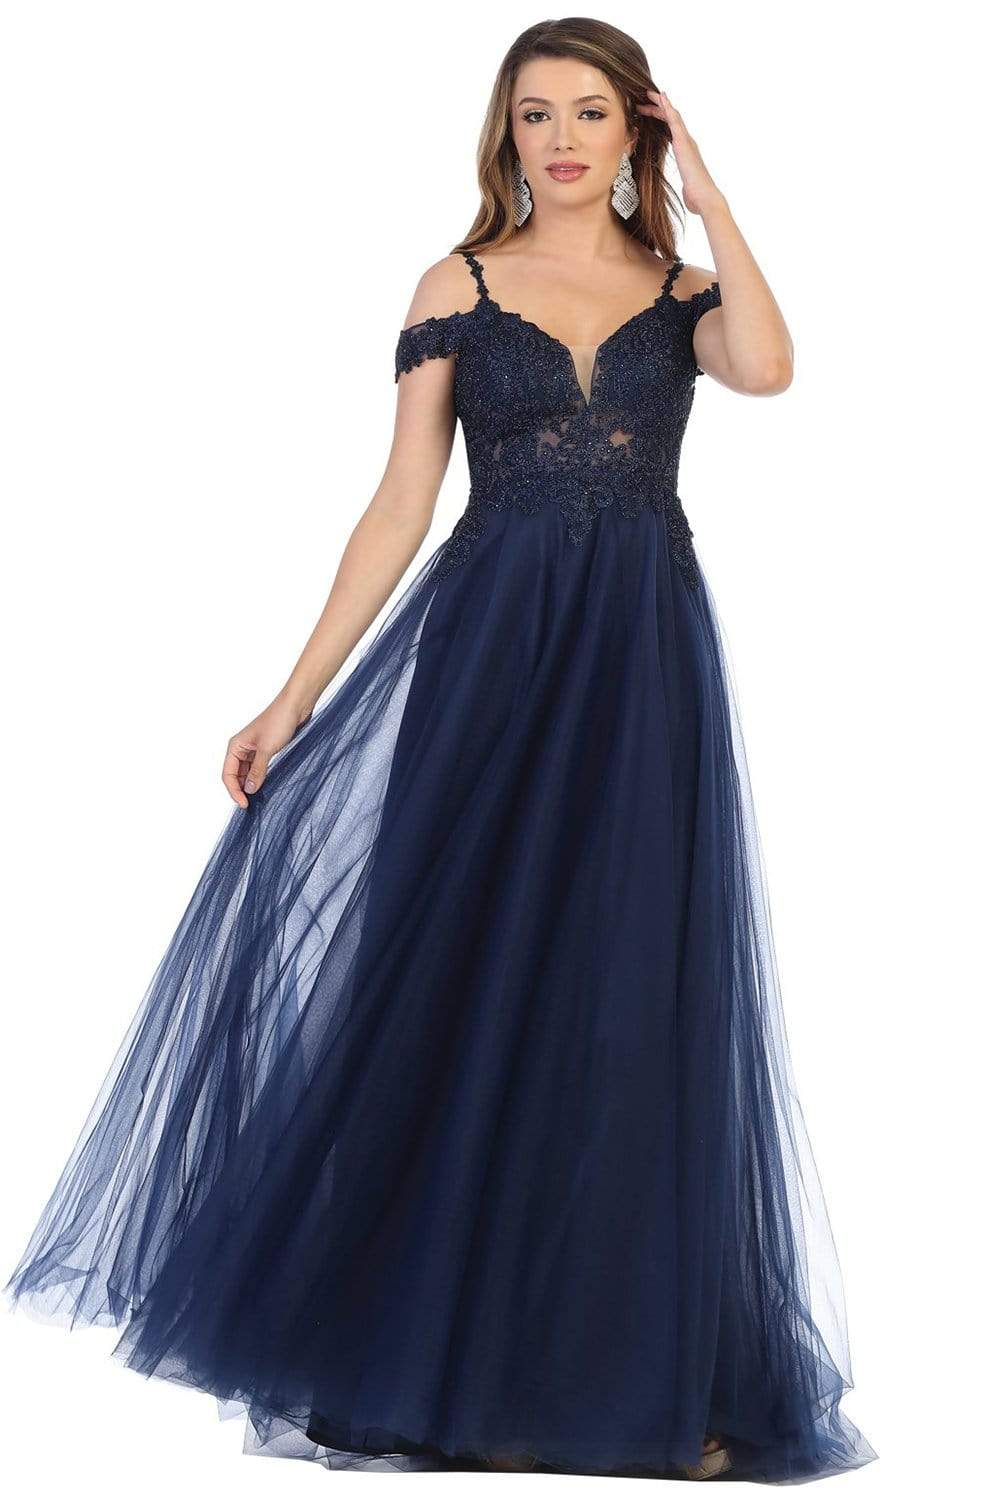 May Queen - MQ1694 Embroidered Deep Off-Shoulder A-line Gown Prom Dresses 4 / Navy